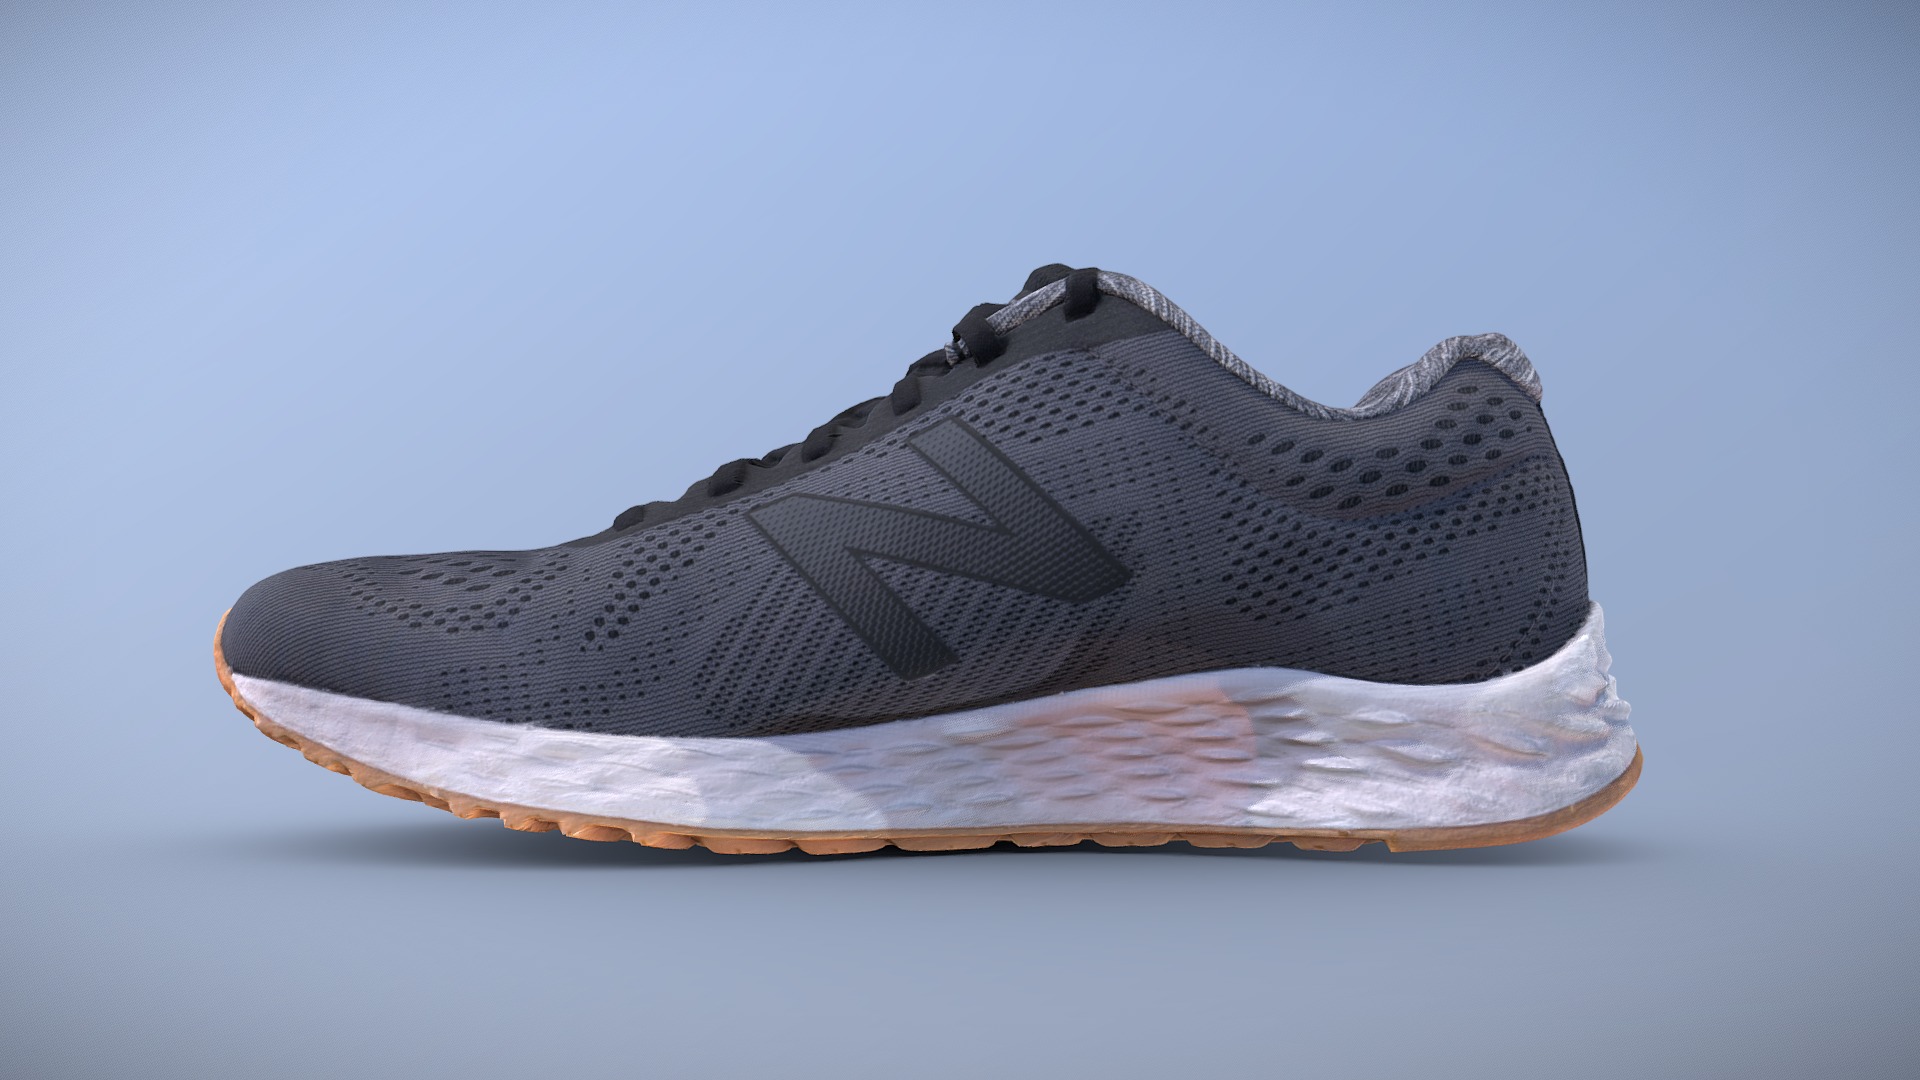 3D model New Balance Maris LB1 - This is a 3D model of the New Balance Maris LB1. The 3D model is about a black and white shoe.